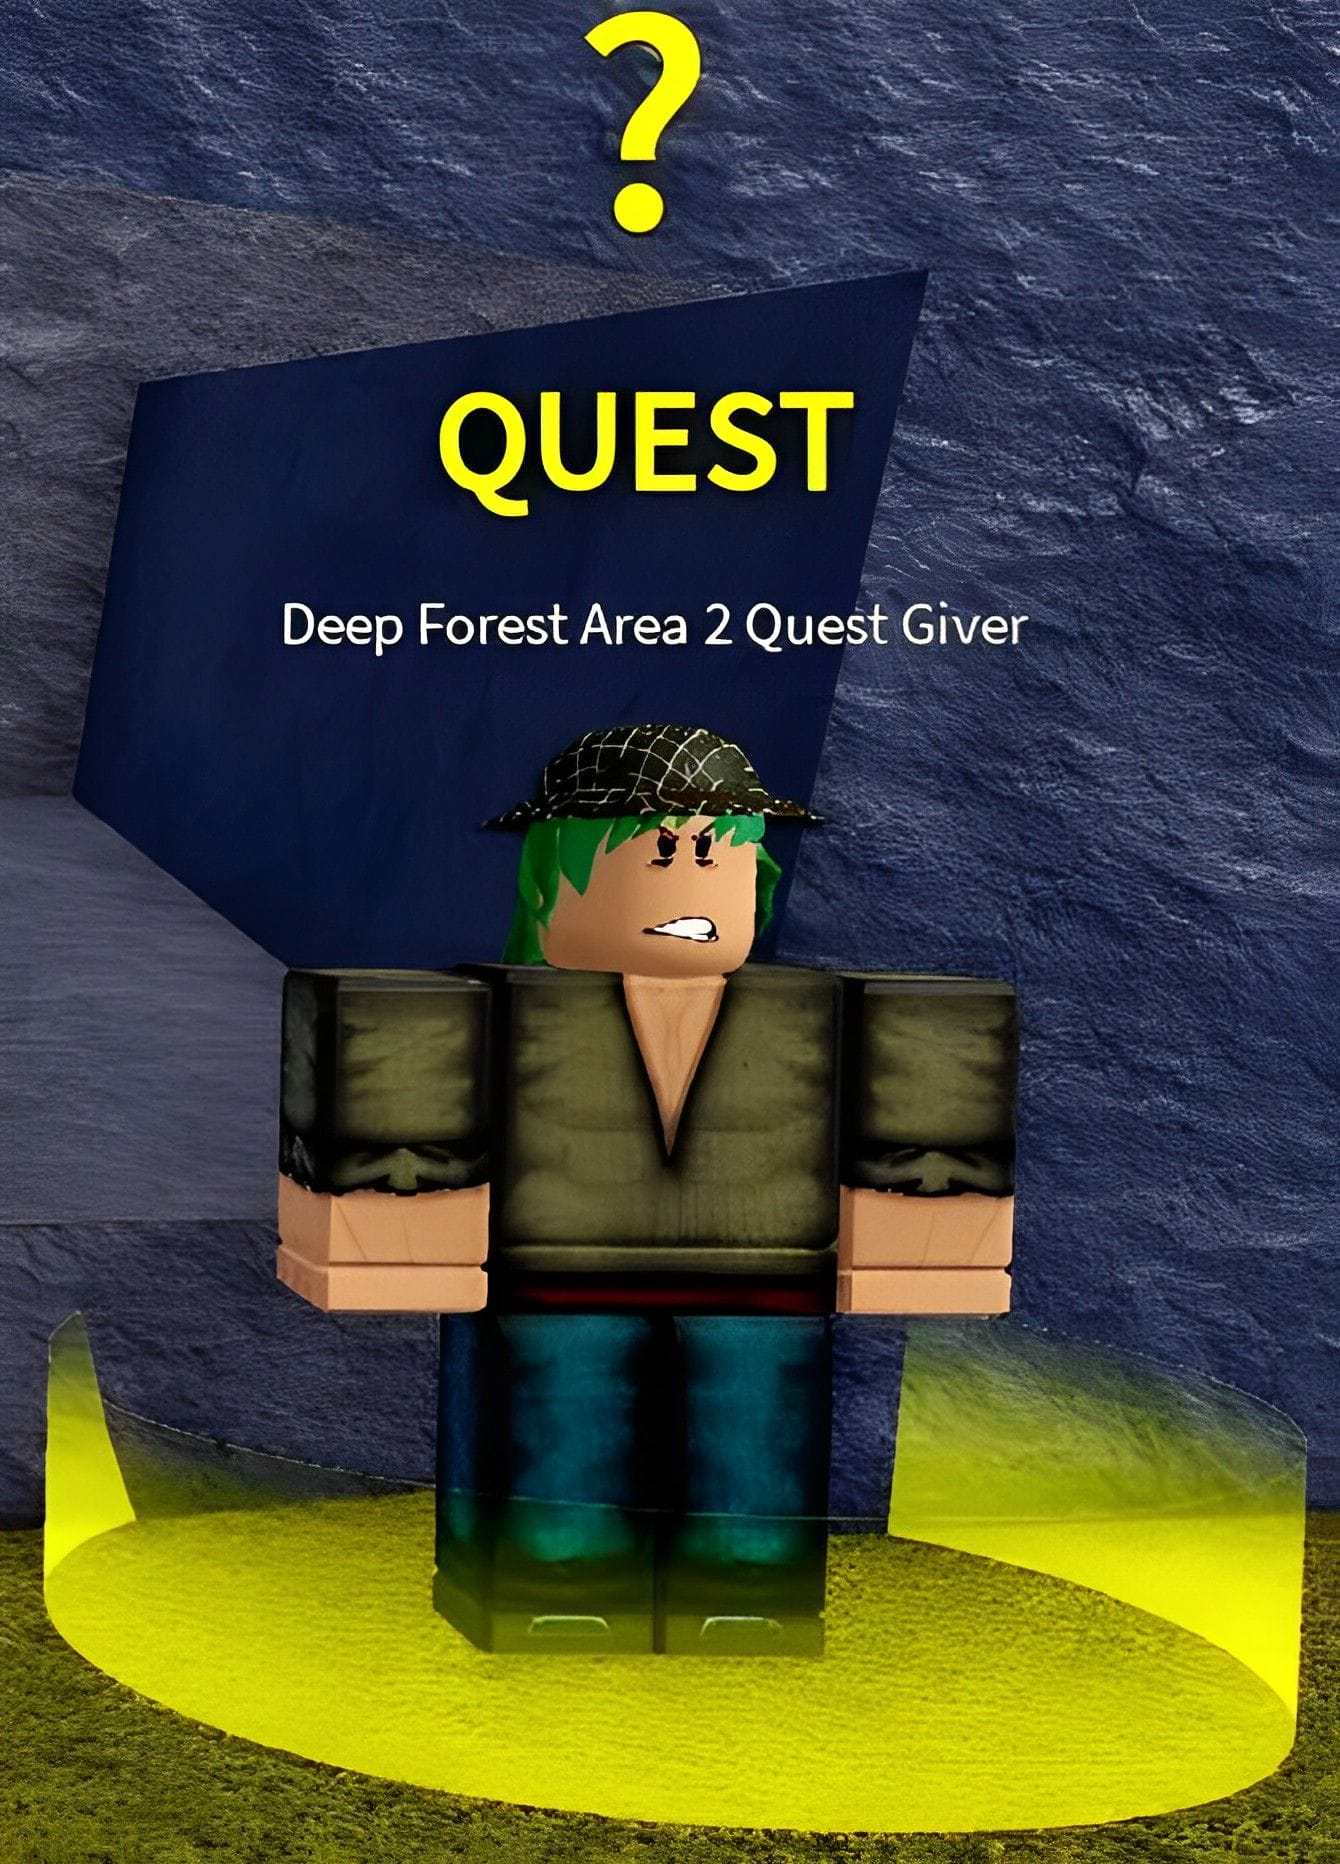 ALL QUEST LOCATIONS FOR LEVEL 1500 - 2000 IN BLOX FRUIT SEA 3 